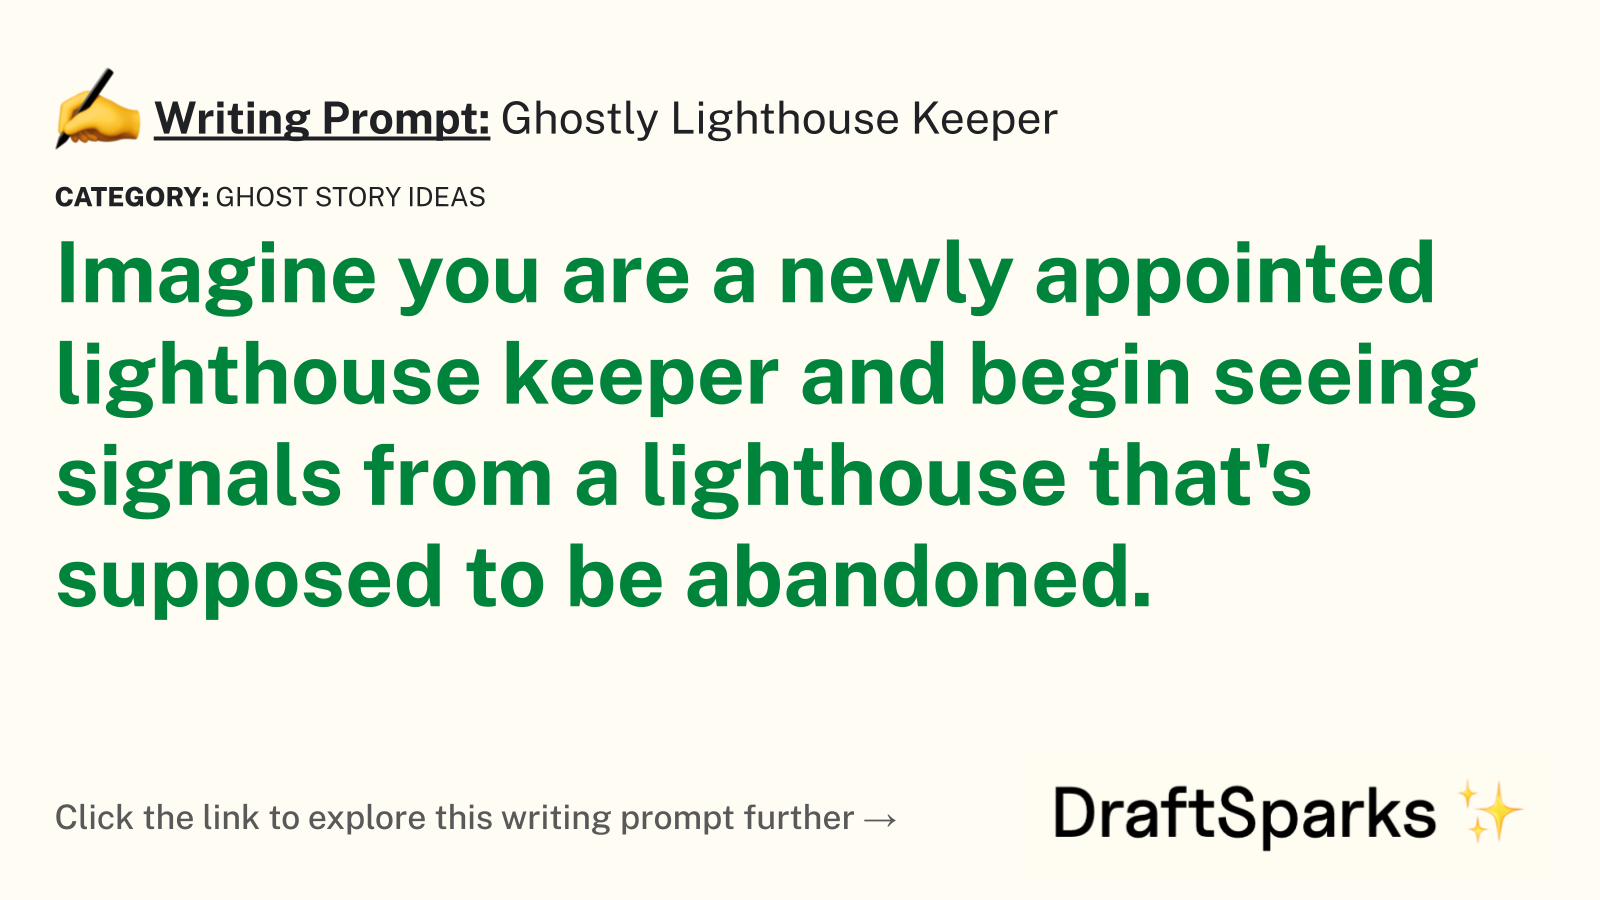 Ghostly Lighthouse Keeper